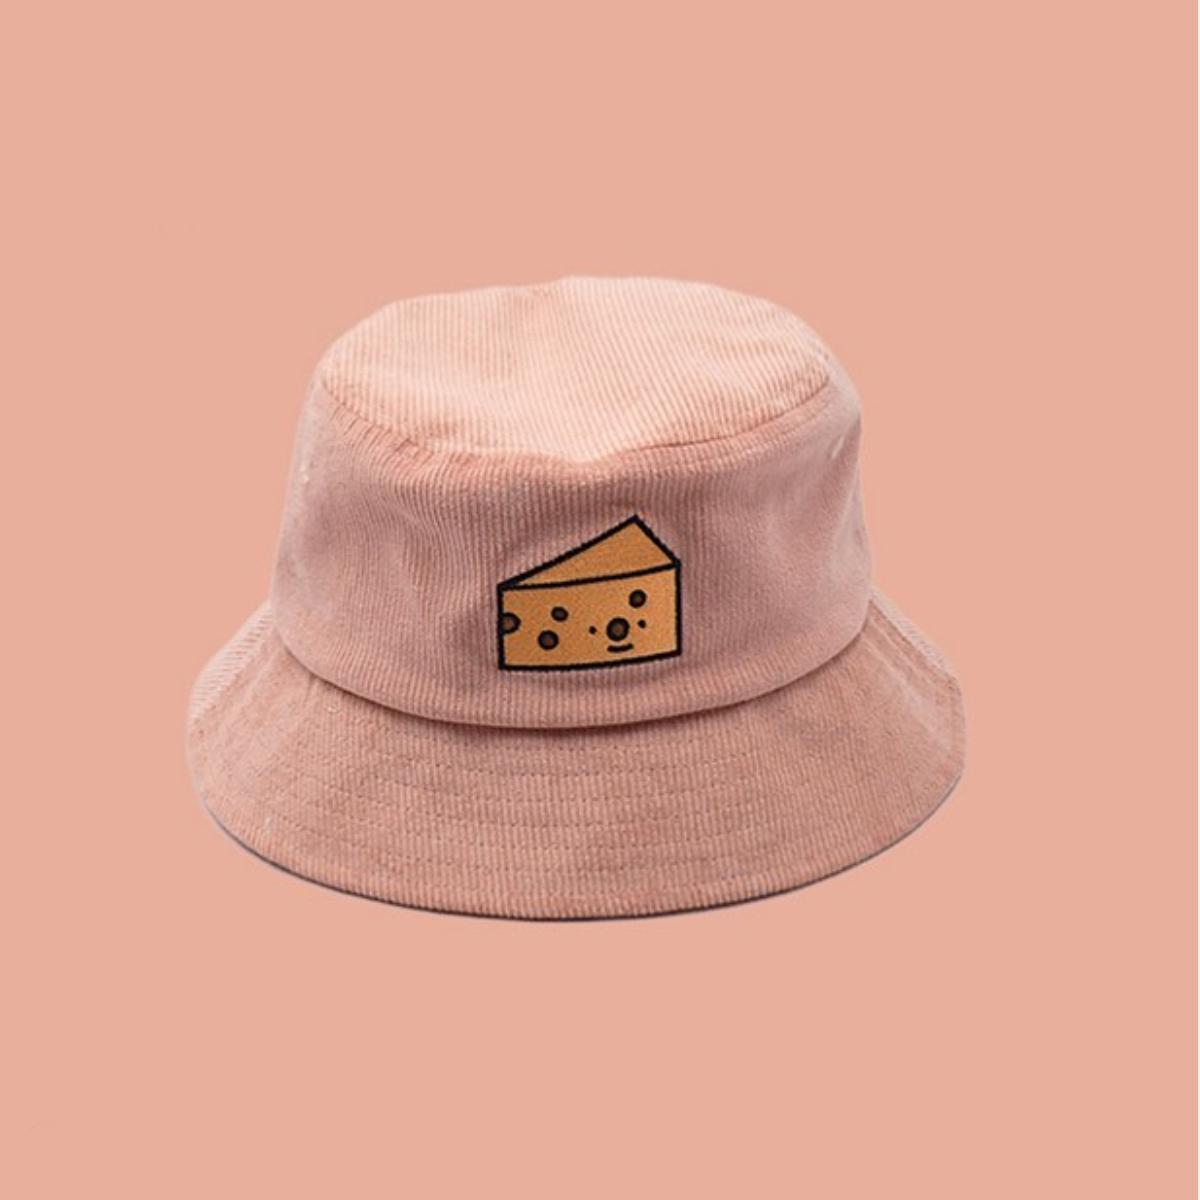 Customised bucket hat merch design with embroidered patch